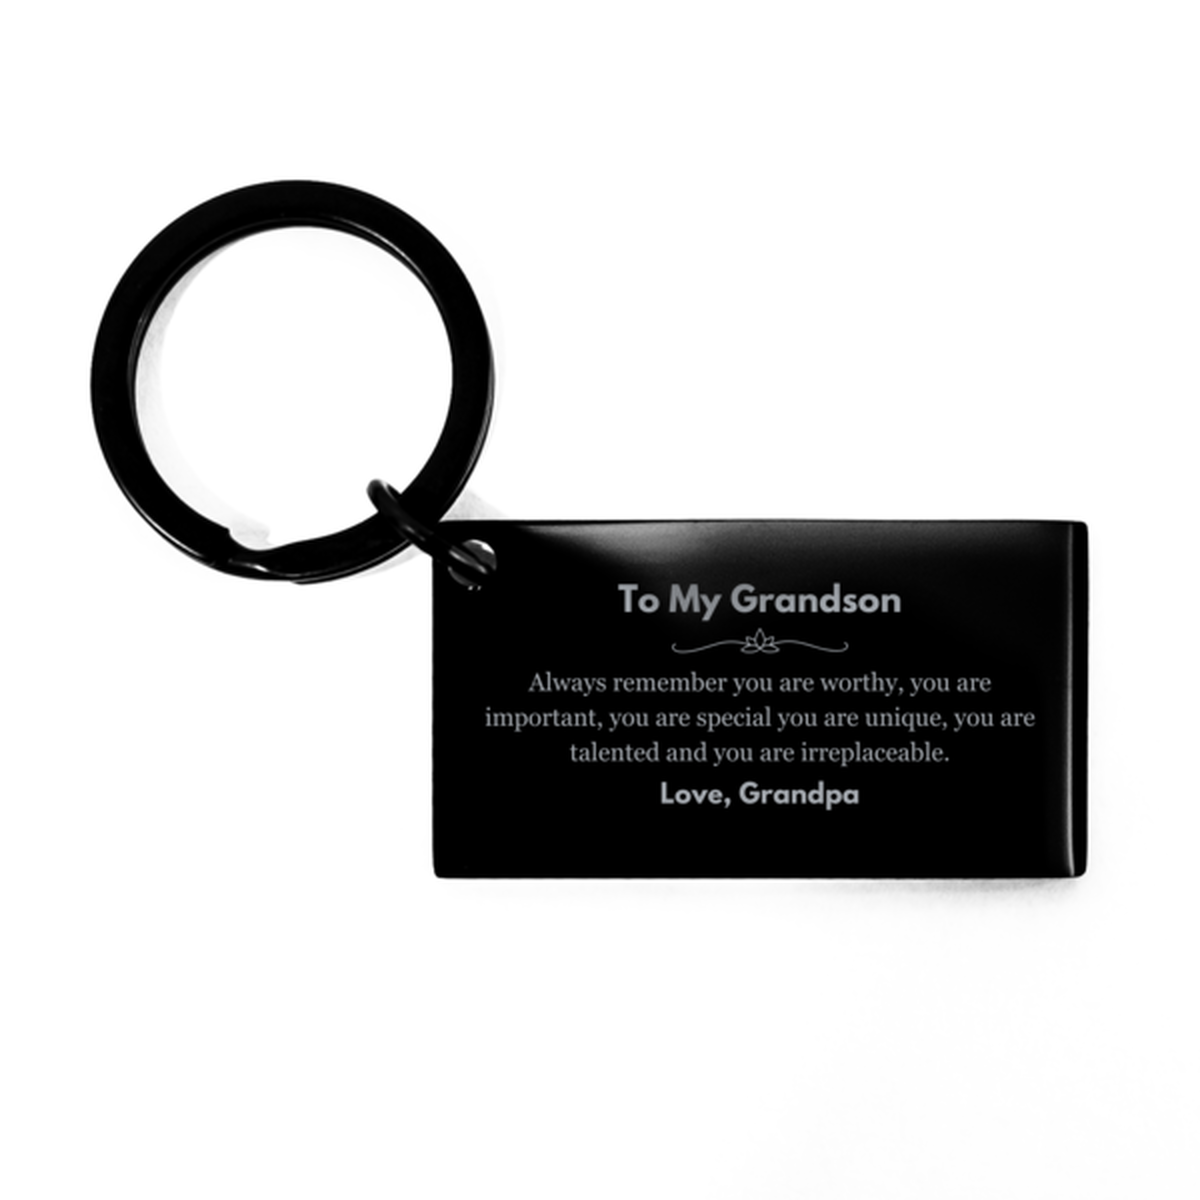 Grandson Birthday Gifts from Grandpa, Inspirational Keychain for Grandson Christmas Graduation Gifts for Grandson Always remember you are worthy, you are important. Love, Grandpa